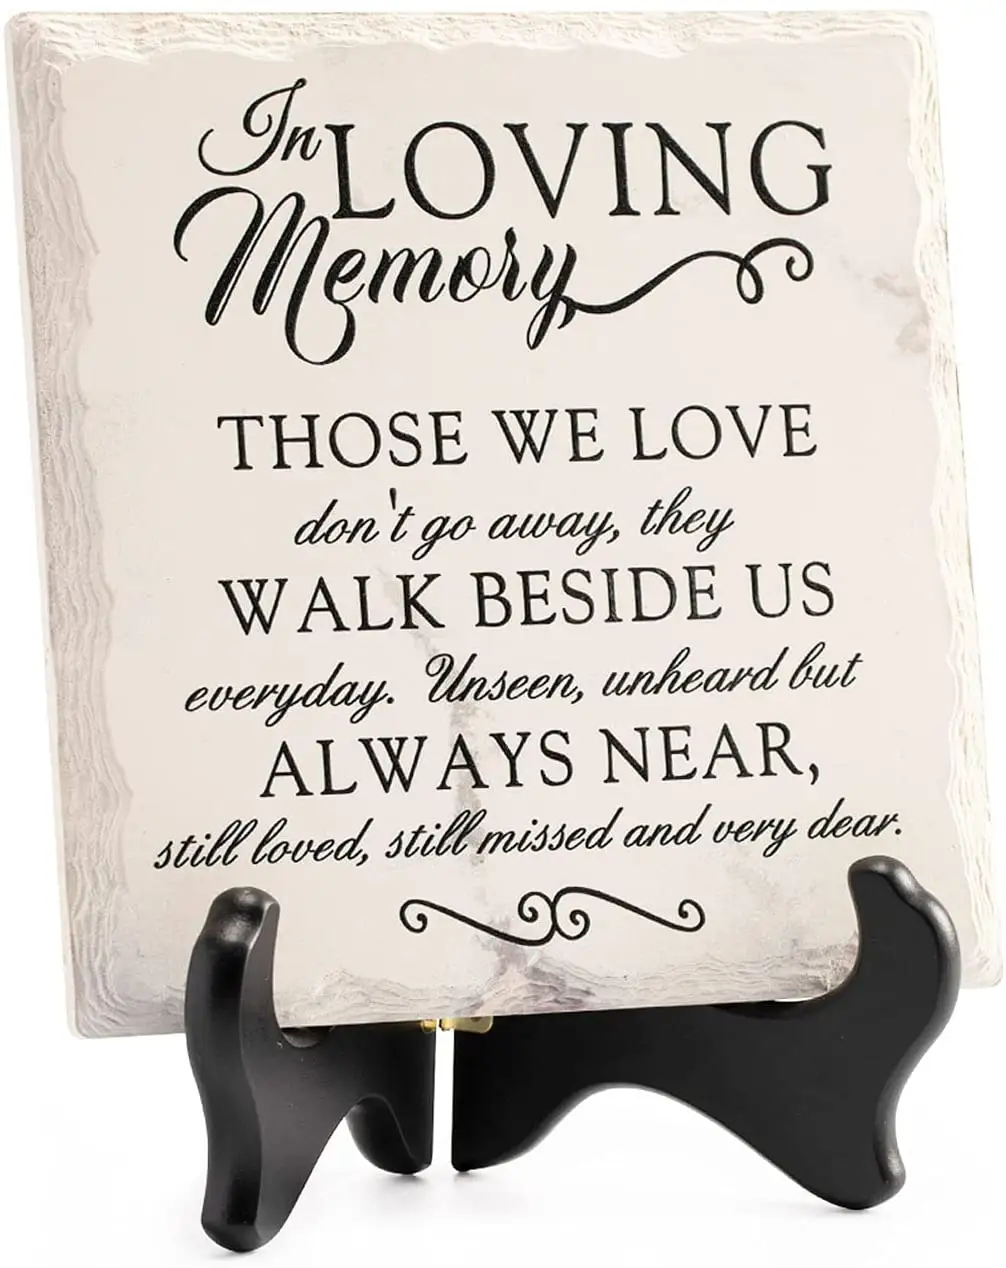 Sympathy Gifts Granny Memory Plaque for Loss Loved One with Wooden Stand Funeral Decor Sign